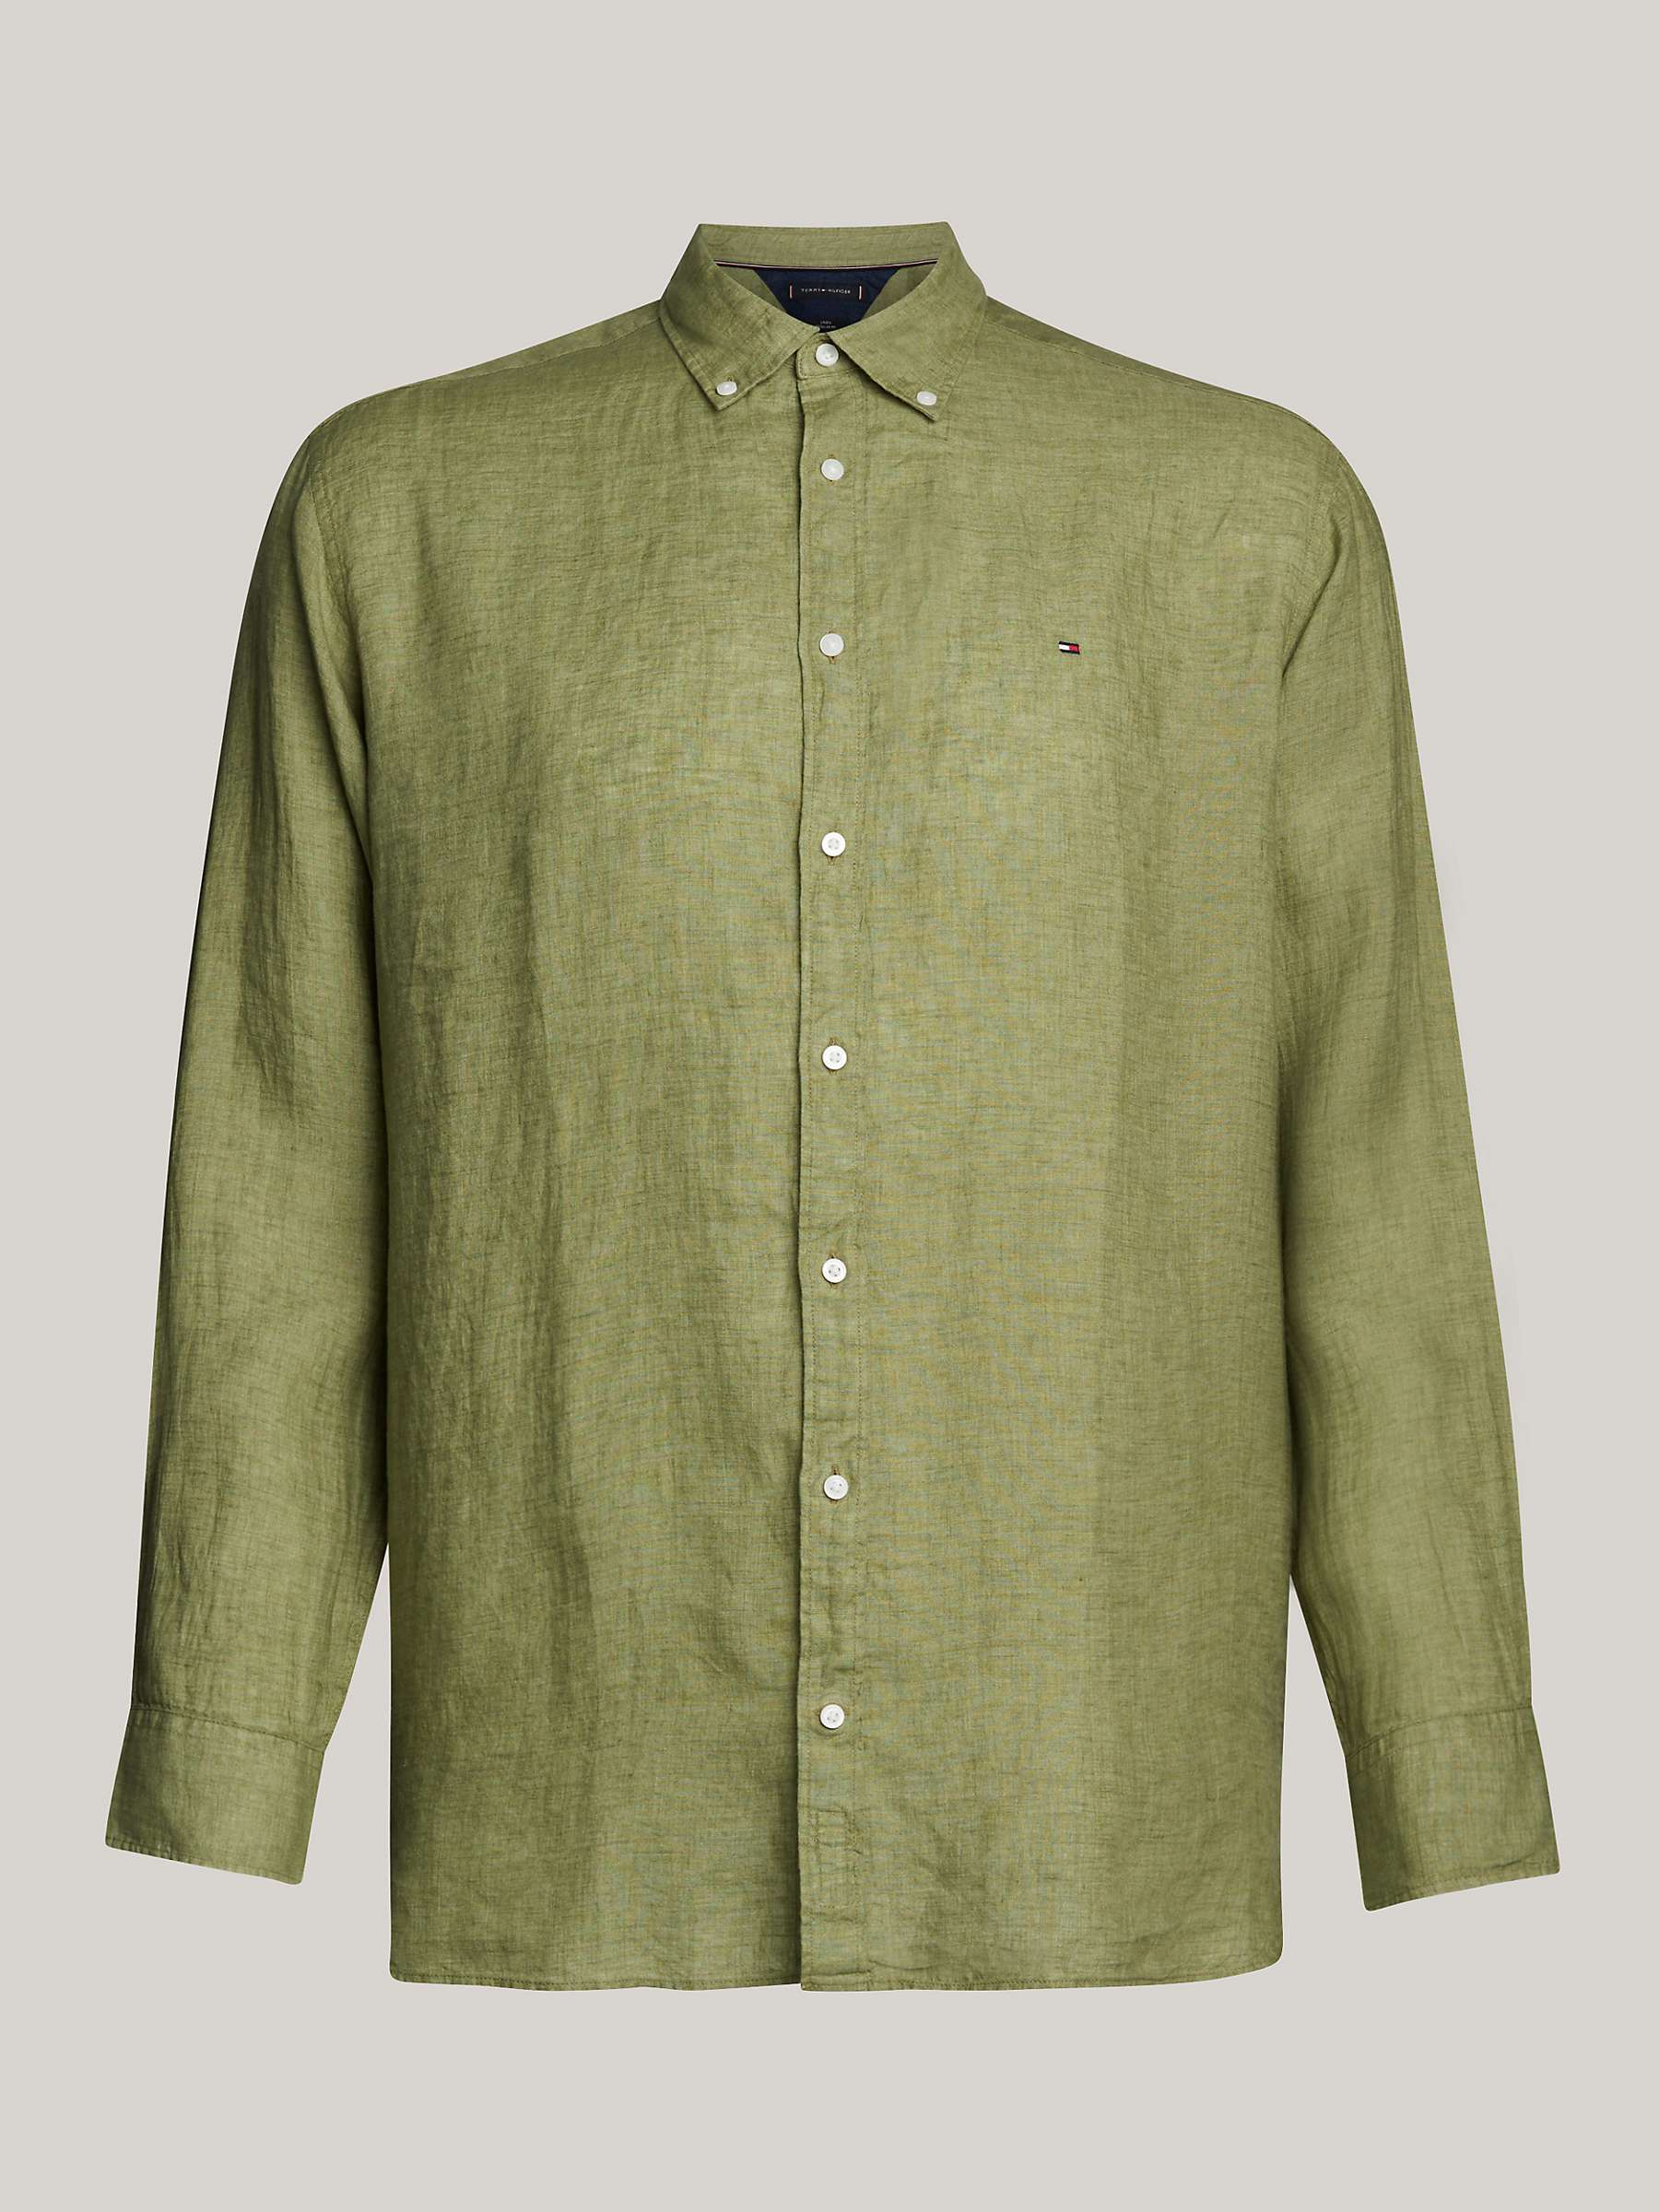 Buy Tommy Hilfiger Big & Tall Linen Long Sleeve Shirt, Faded Olive Online at johnlewis.com